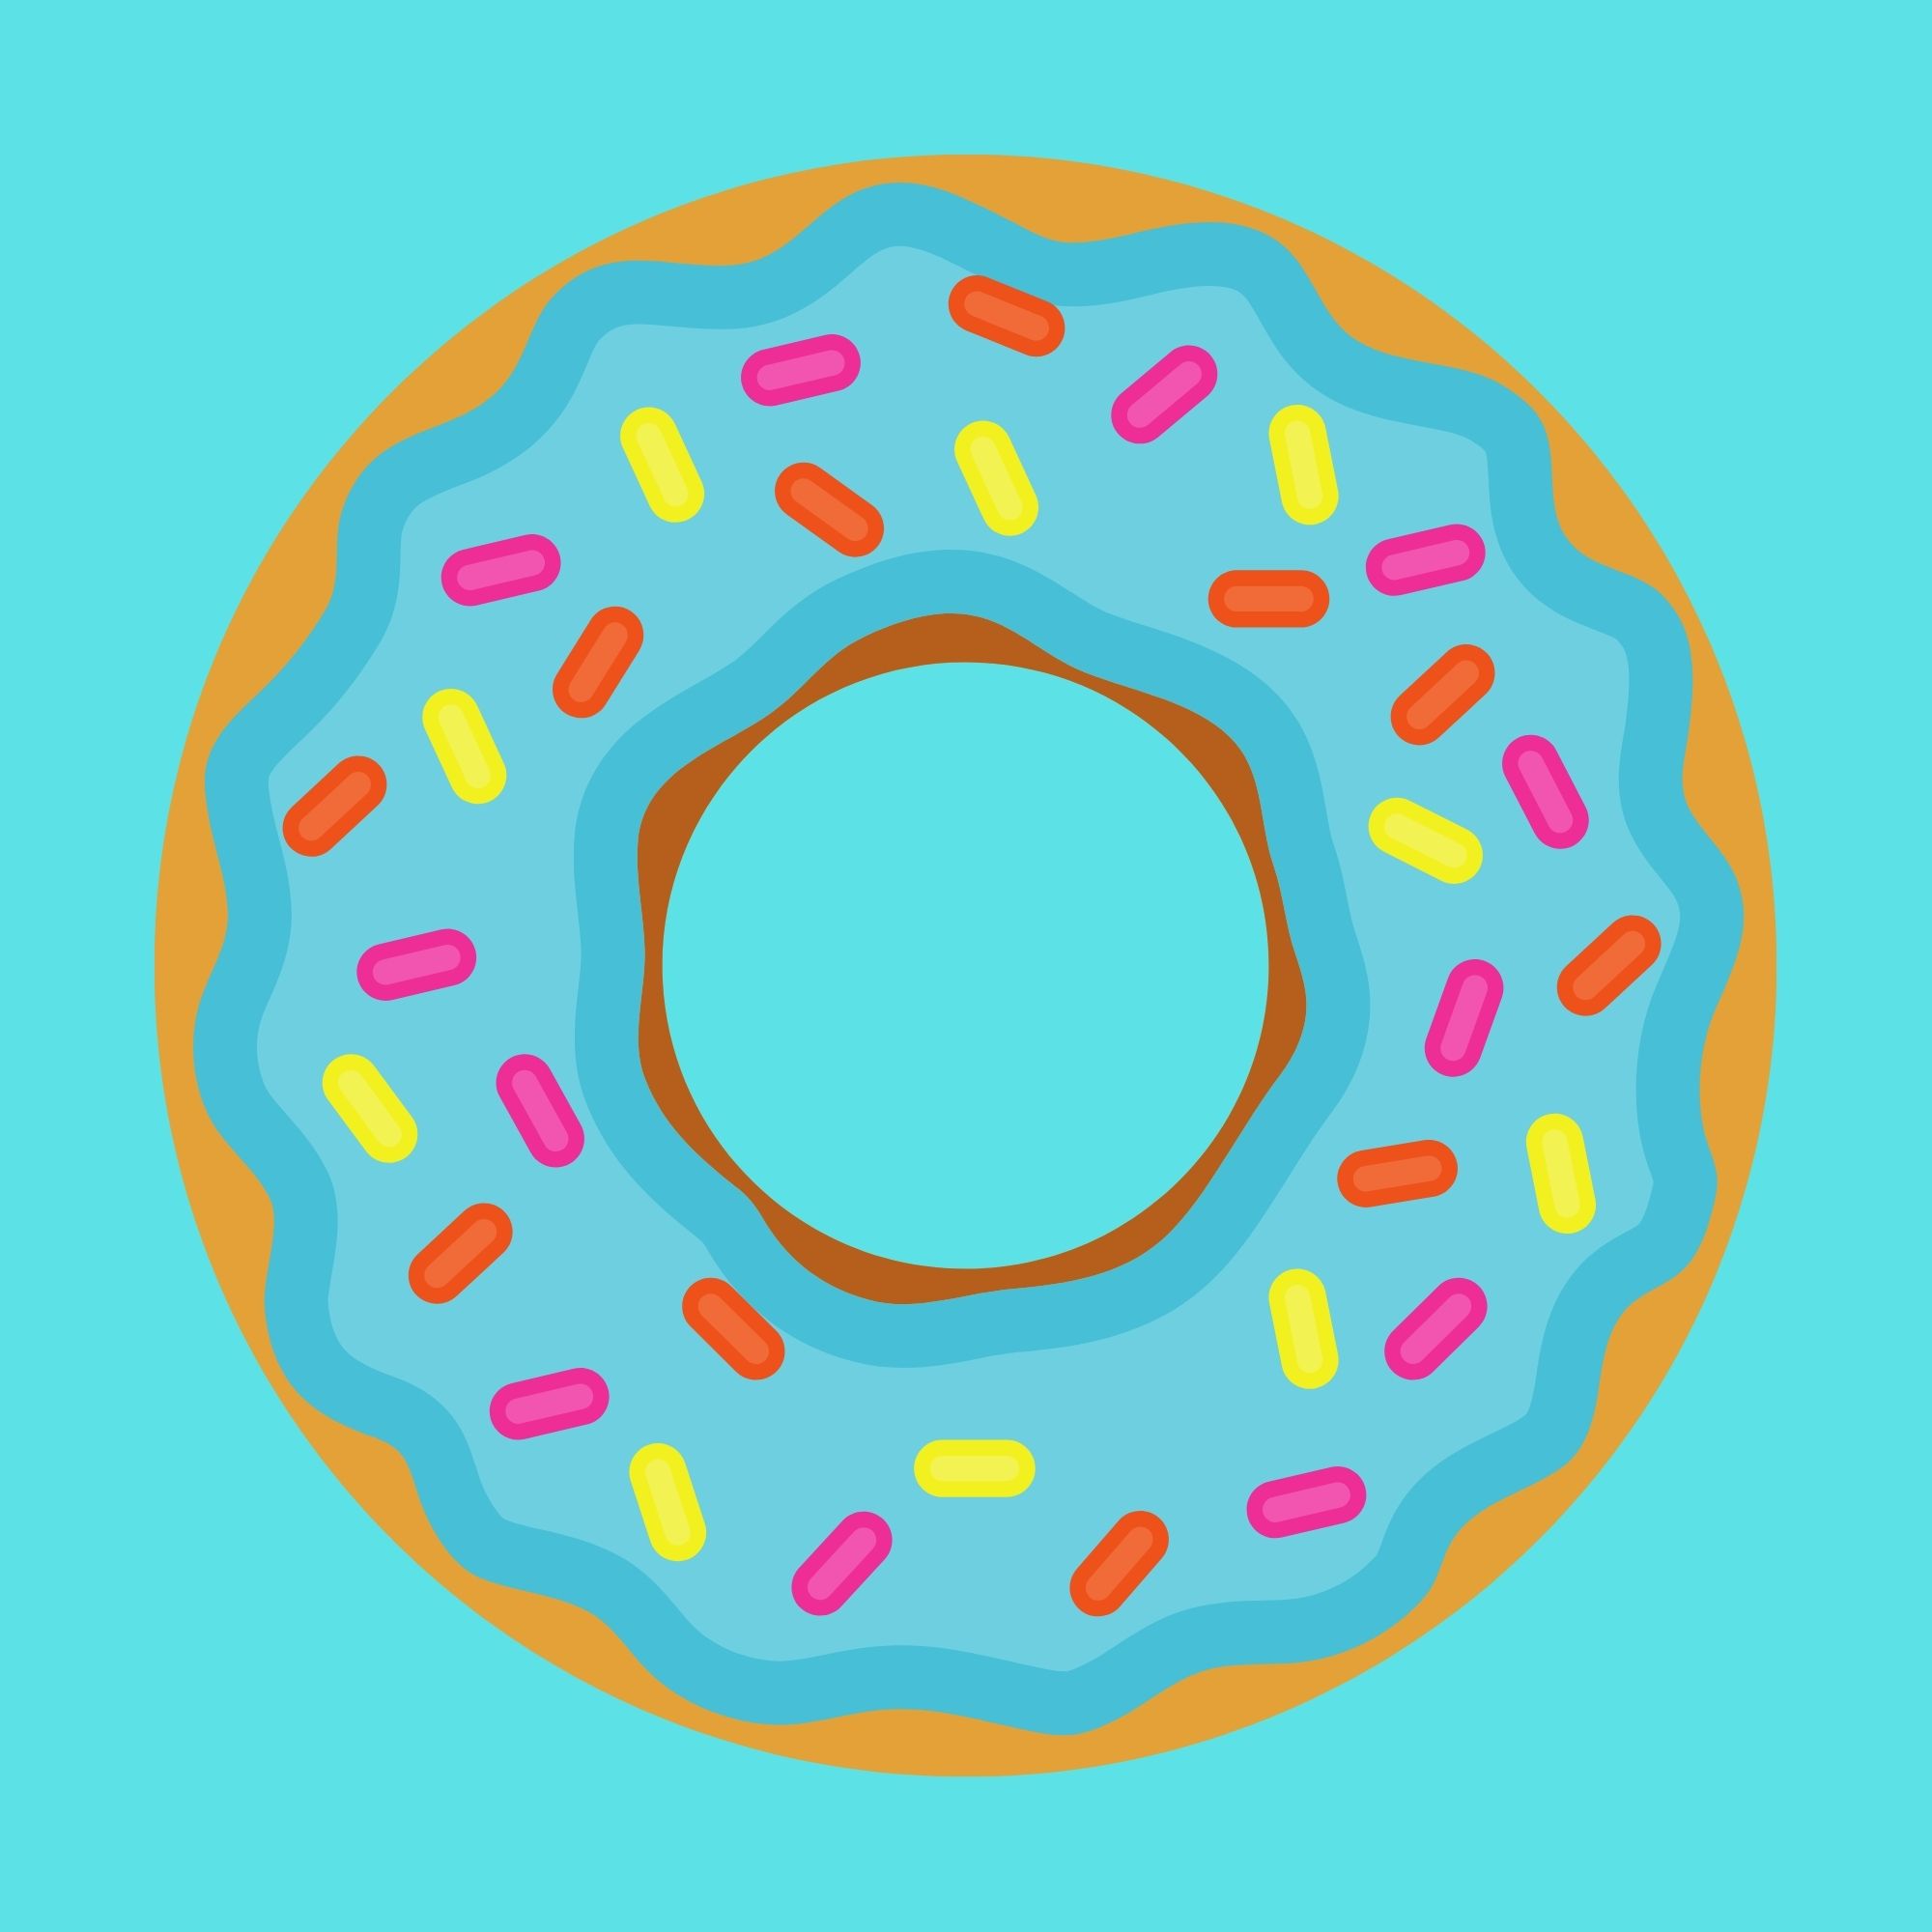 Donuts #4 - Poly Donuts